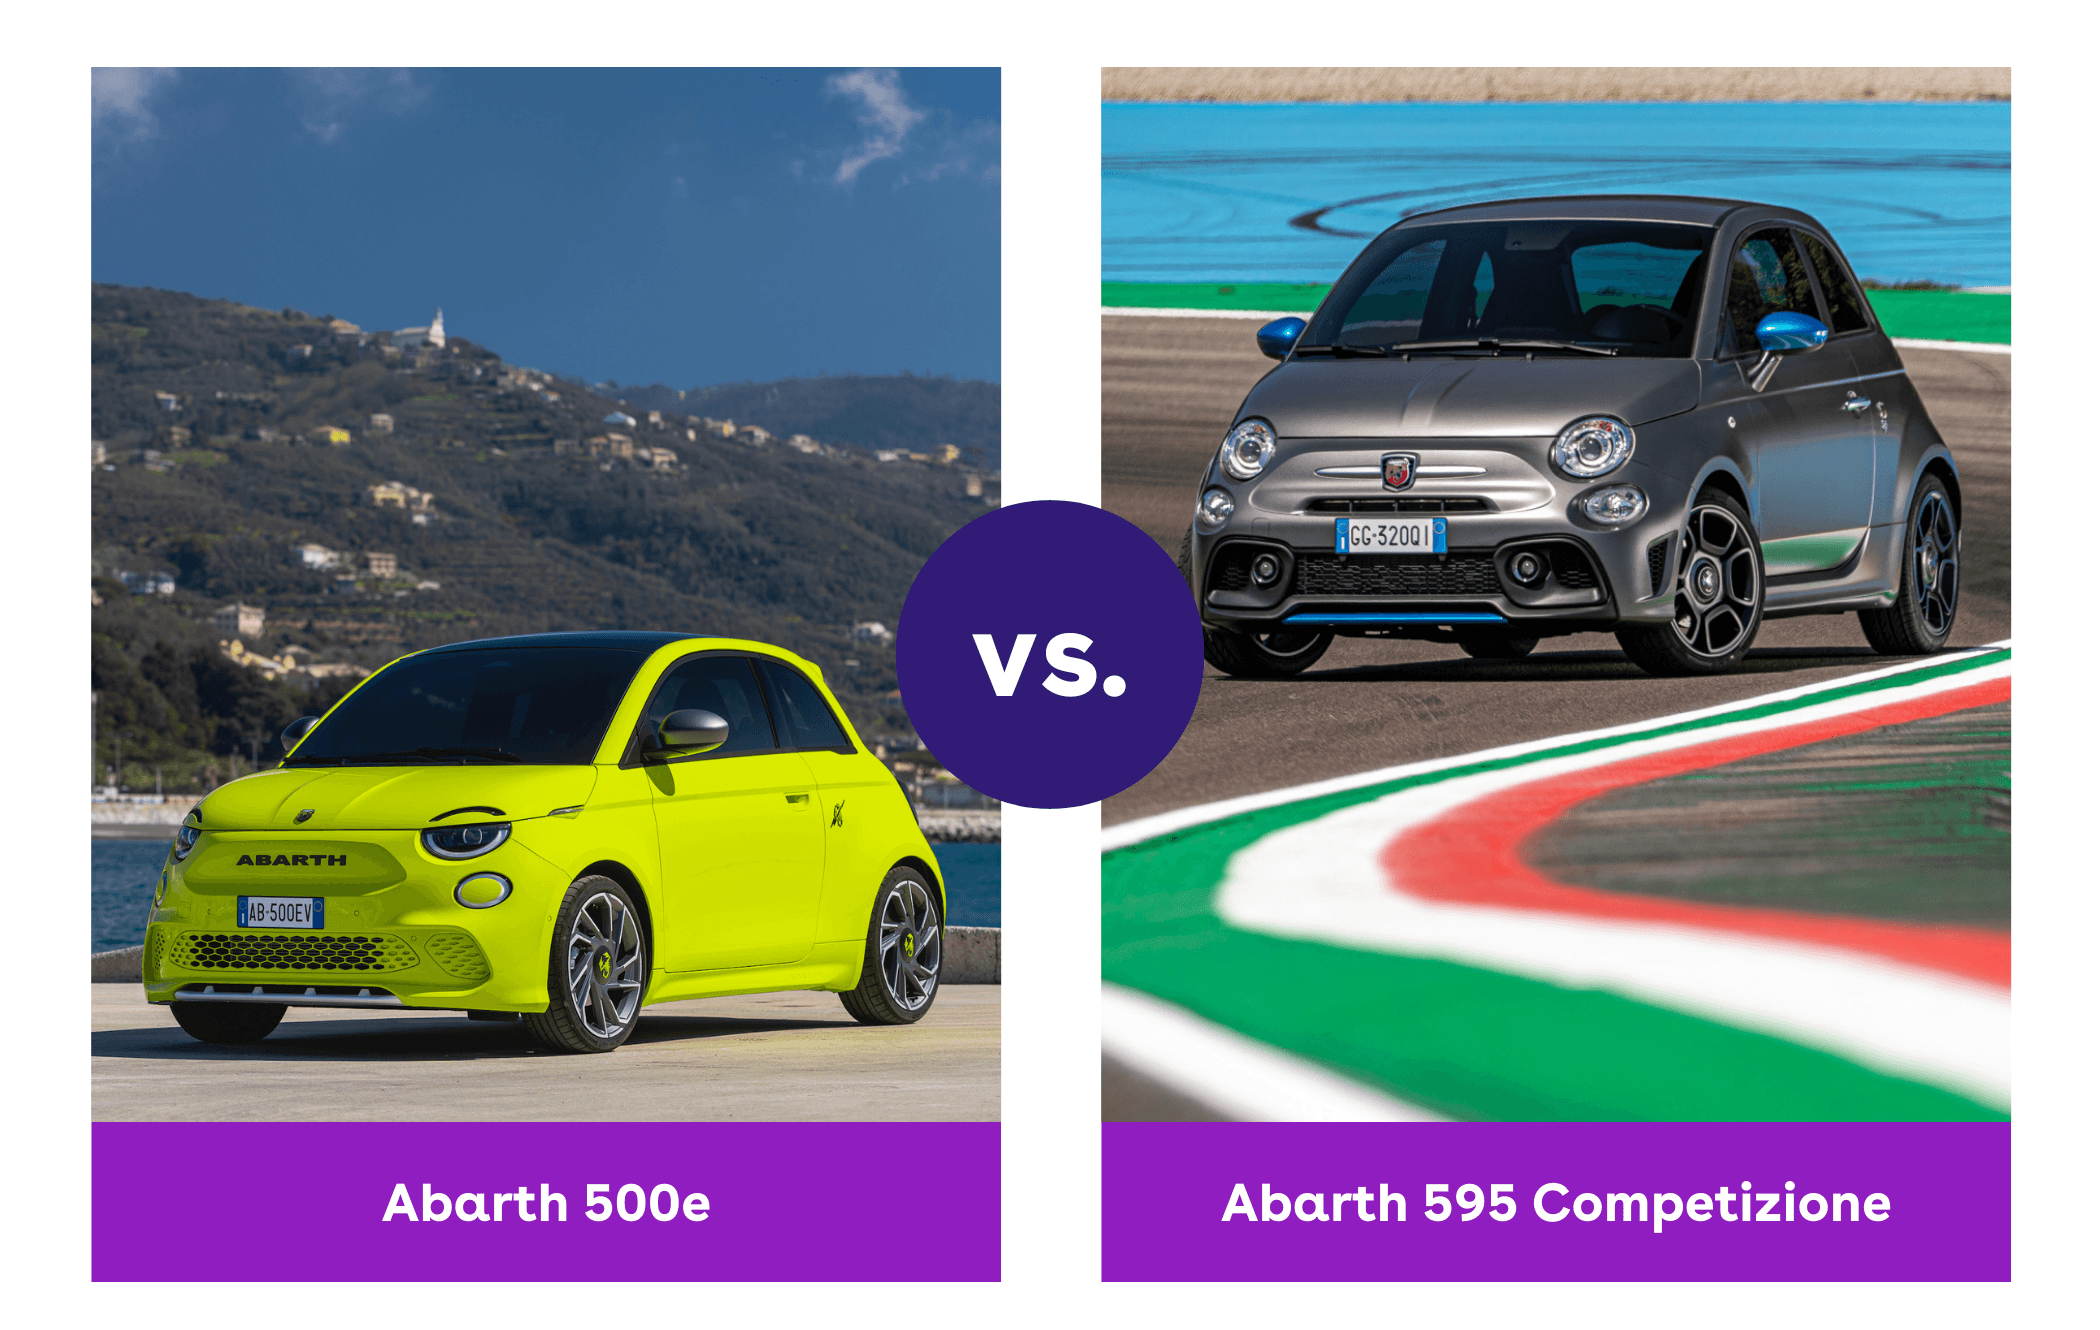 Side-by-side view of Abarth 500e and Abarth 595 front